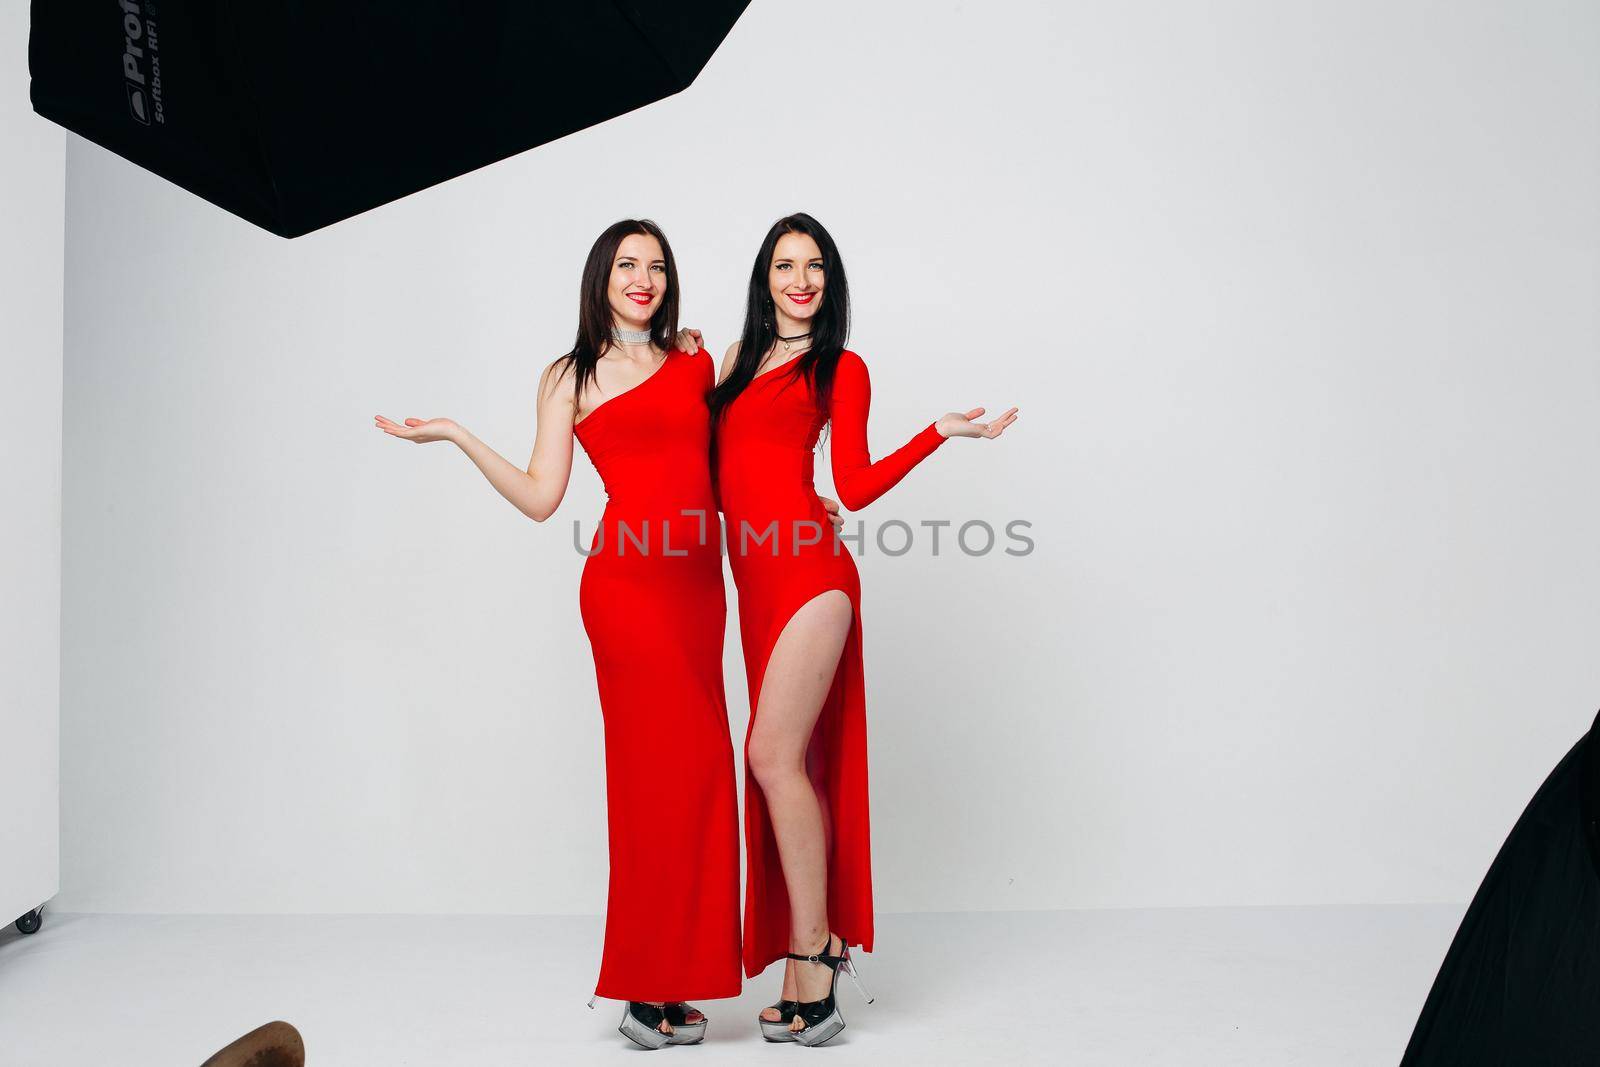 Two sexy and beautiful sisters twins in red dresses posing, looking at camera holding hands up. Pretty dancing ladies with long hair. Fashionable and stylish girls. Shopping, fashion, party.